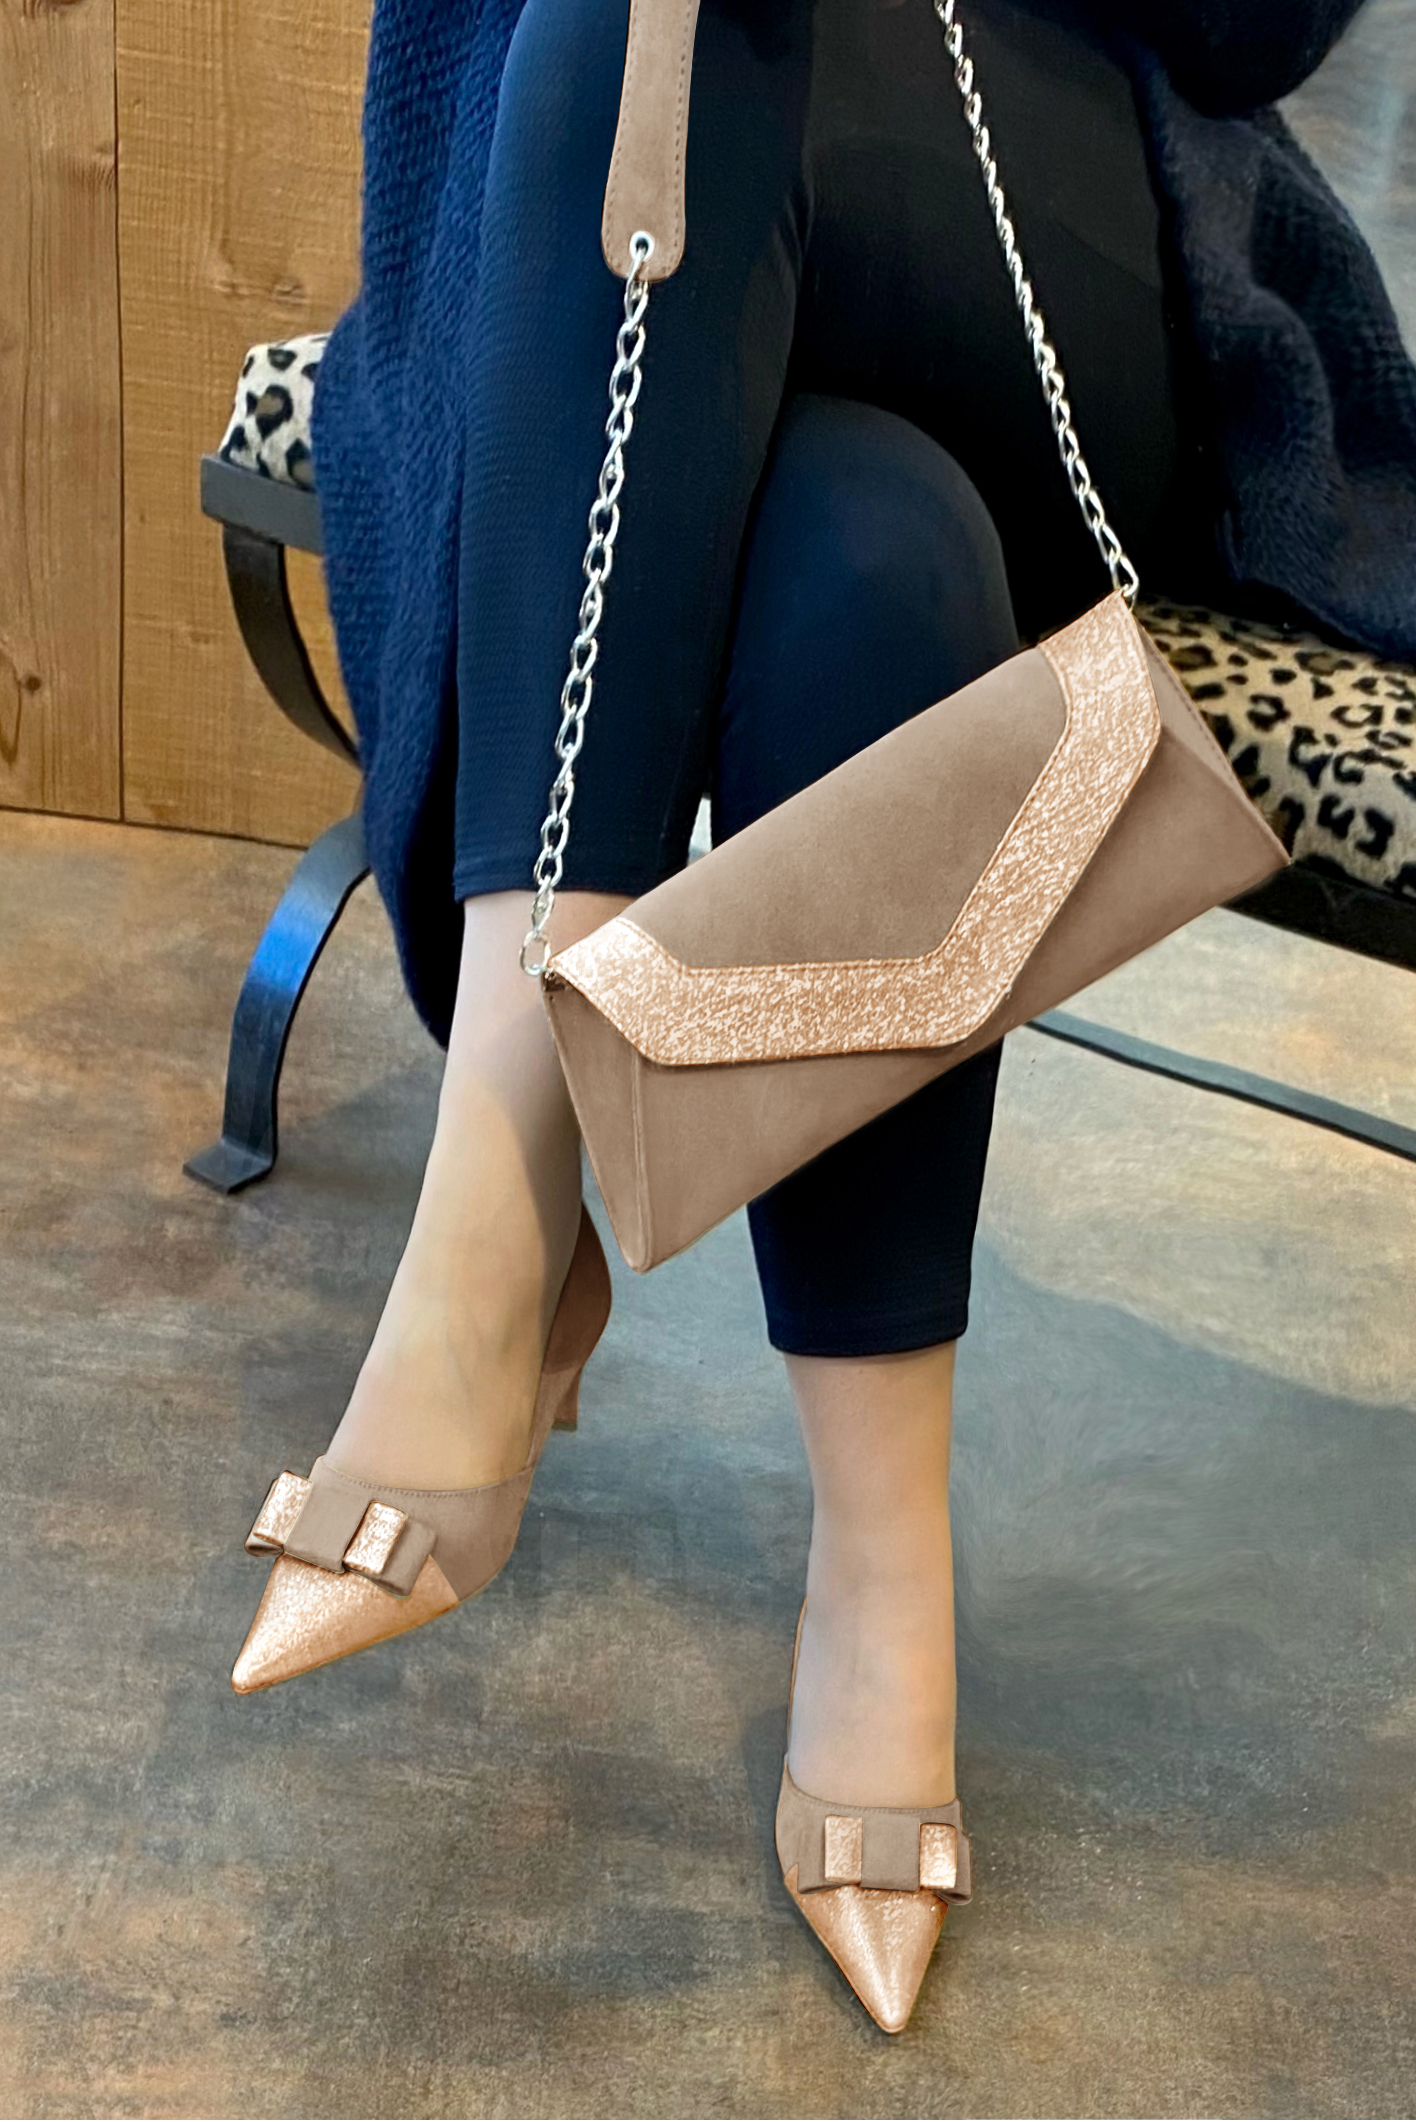 Powder pink and biscuit beige matching pumps and clutch. Worn view - Florence KOOIJMAN